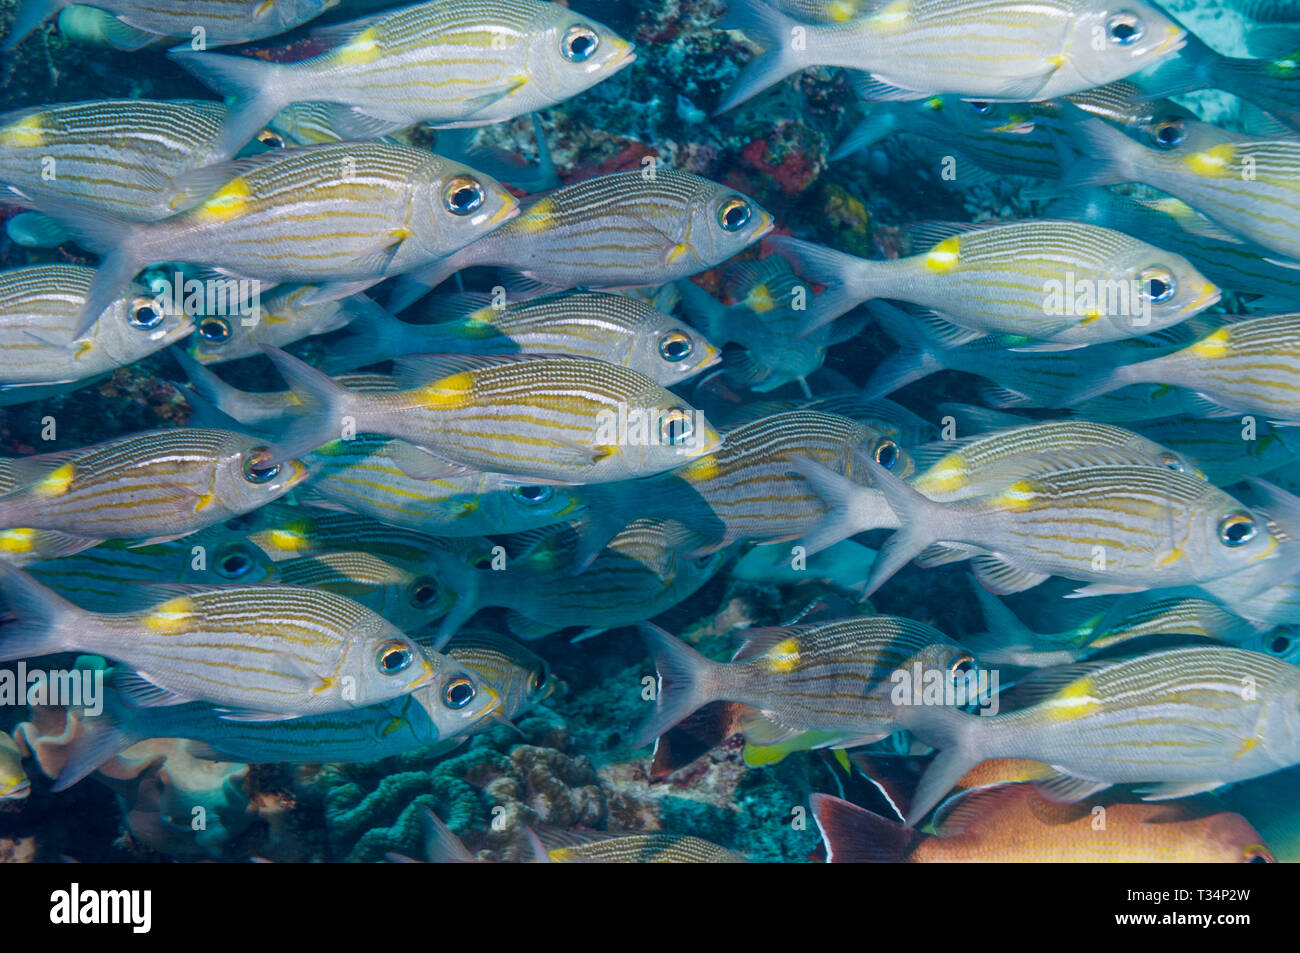 Goldspot seabream or Striped large-eye bream [Gnathodentex aureolineatus], a species of Emperore, school over coral reef. Maldives.  Indian Ocean. Stock Photo